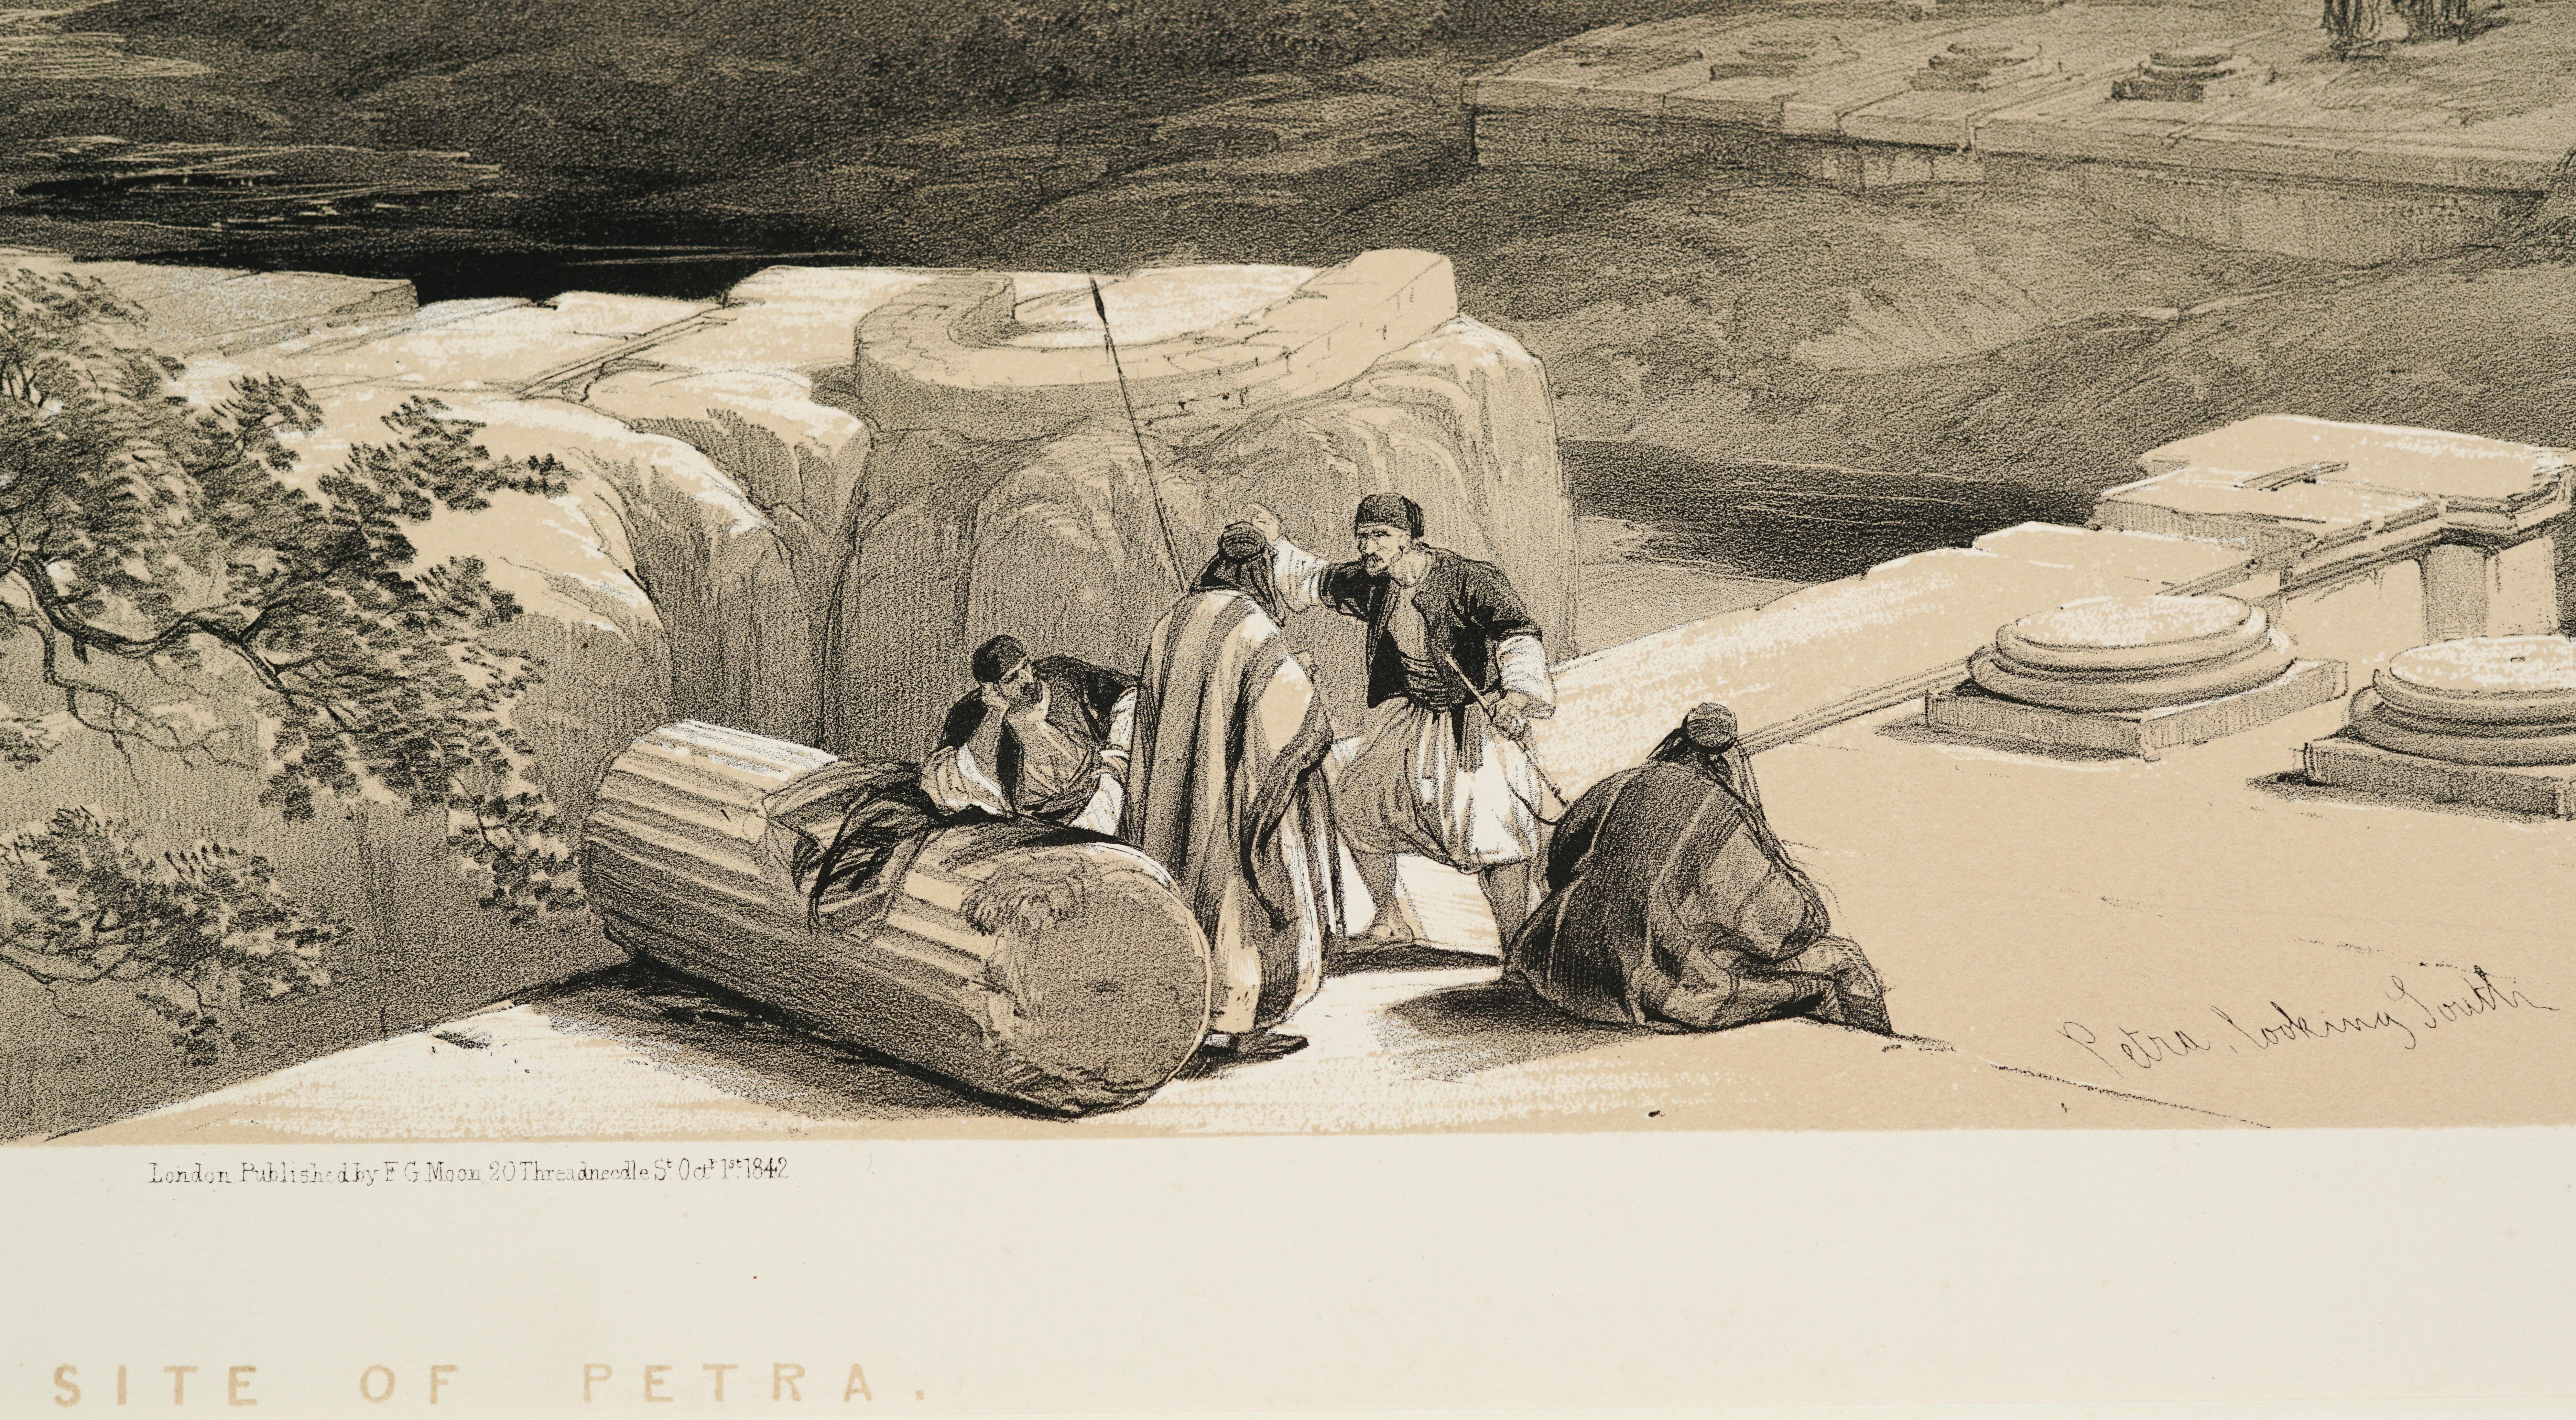 Original hand-colored lithograph by David Roberts (1796 – 1864) published by F.G. Moon, 1842. 
Petra is a historical and archaeological city in southern Jordan, established in 312 BC. It is famous for its rock-cut architecture and water conduit